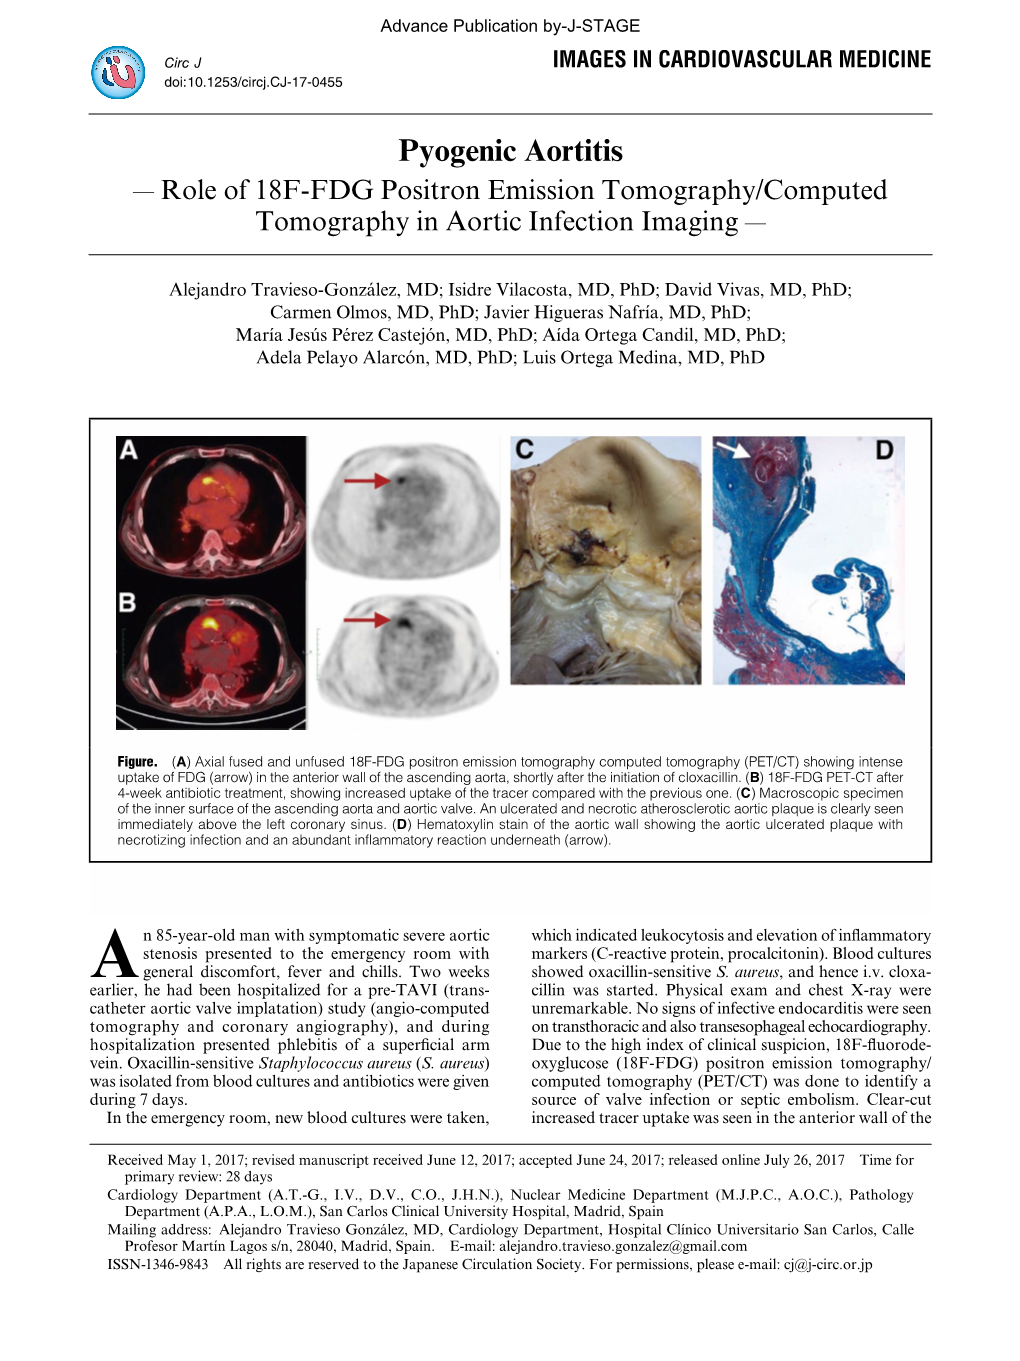 Pyogenic Aortitis ― Role of 18F-FDG Positron Emission Tomography/Computed Tomography in Aortic Infection Imaging ―